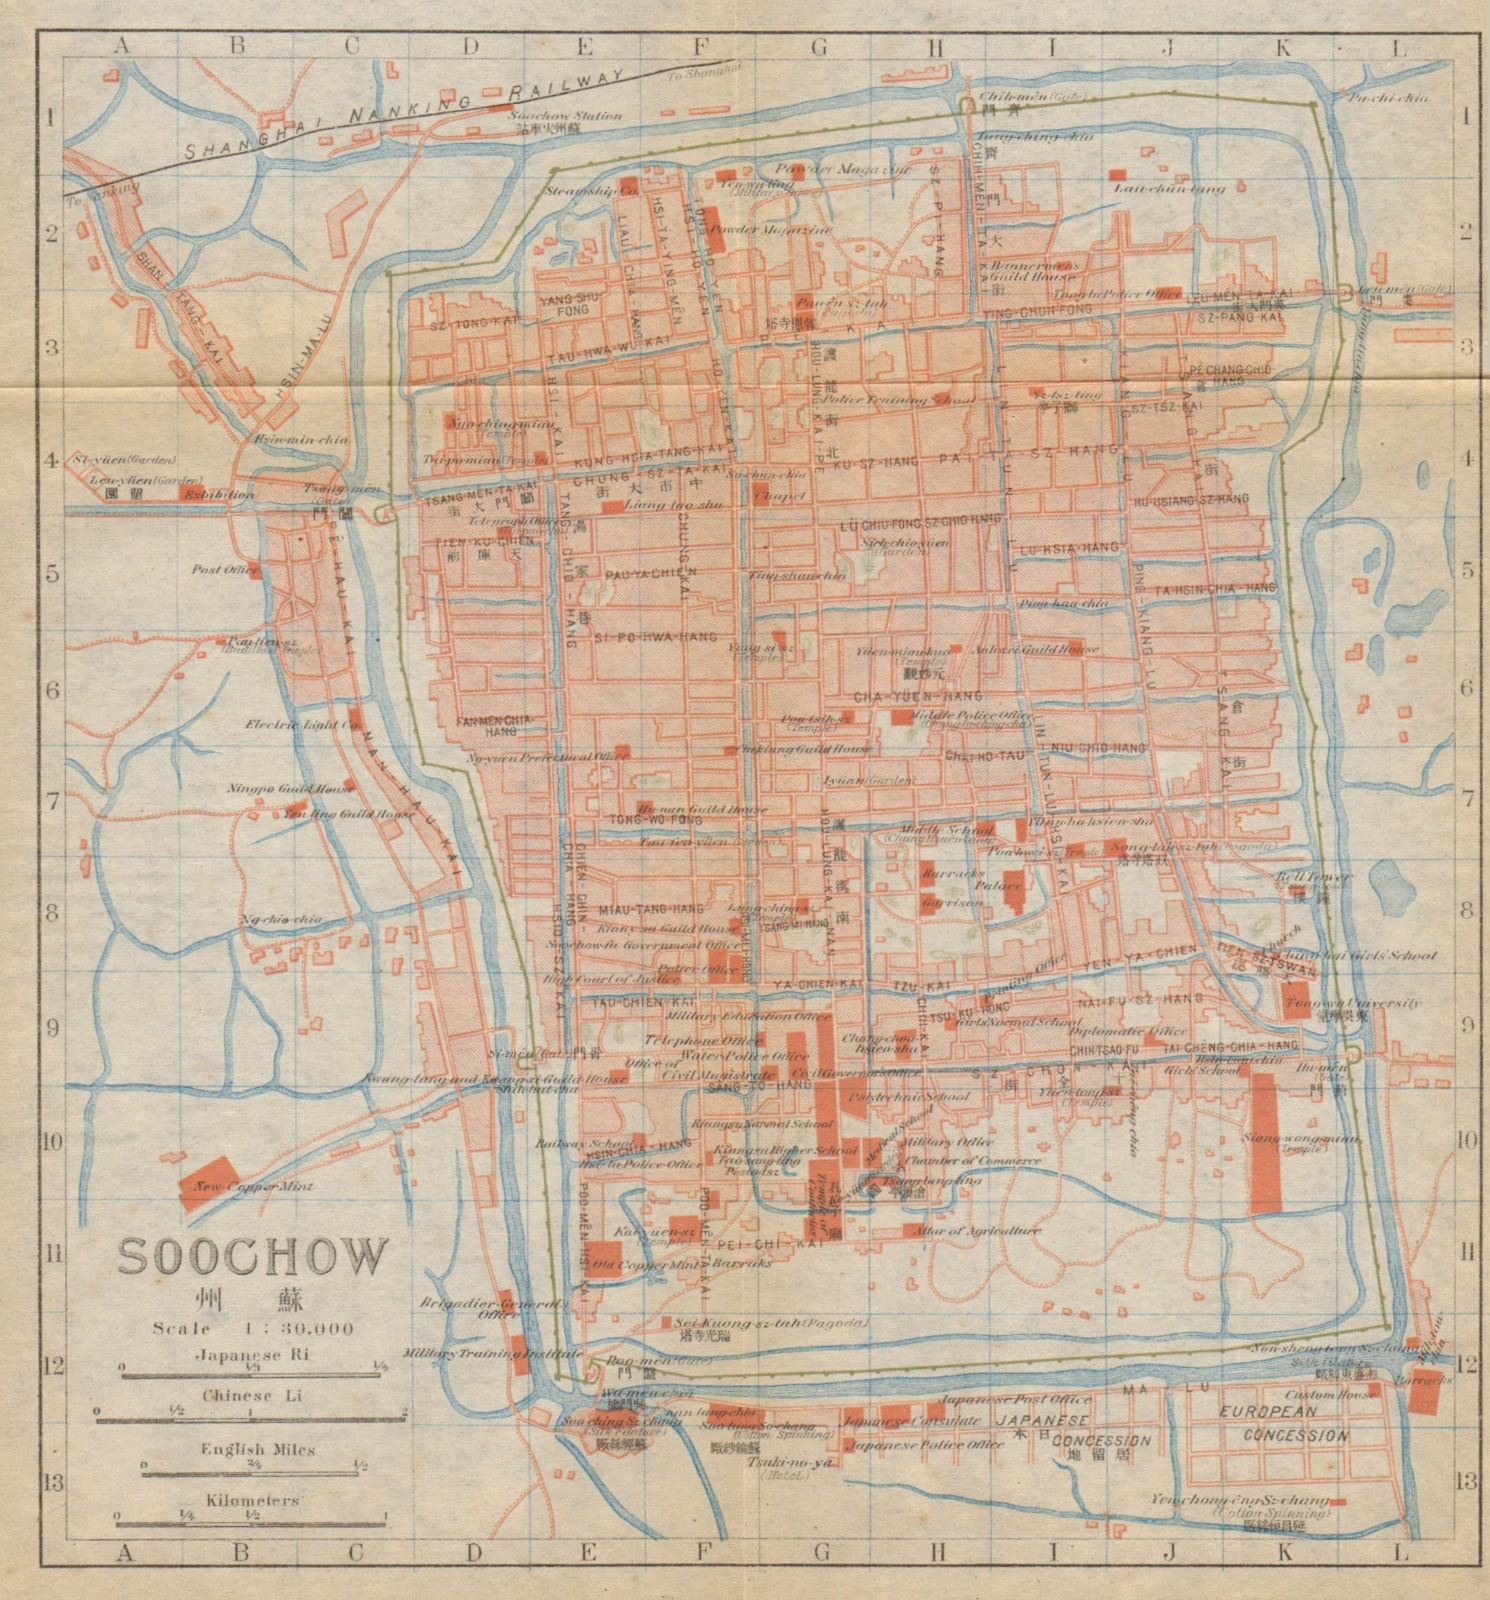 Associate Product 'Soochow'. Suzhou antique town city plan. China 1915 old map chart